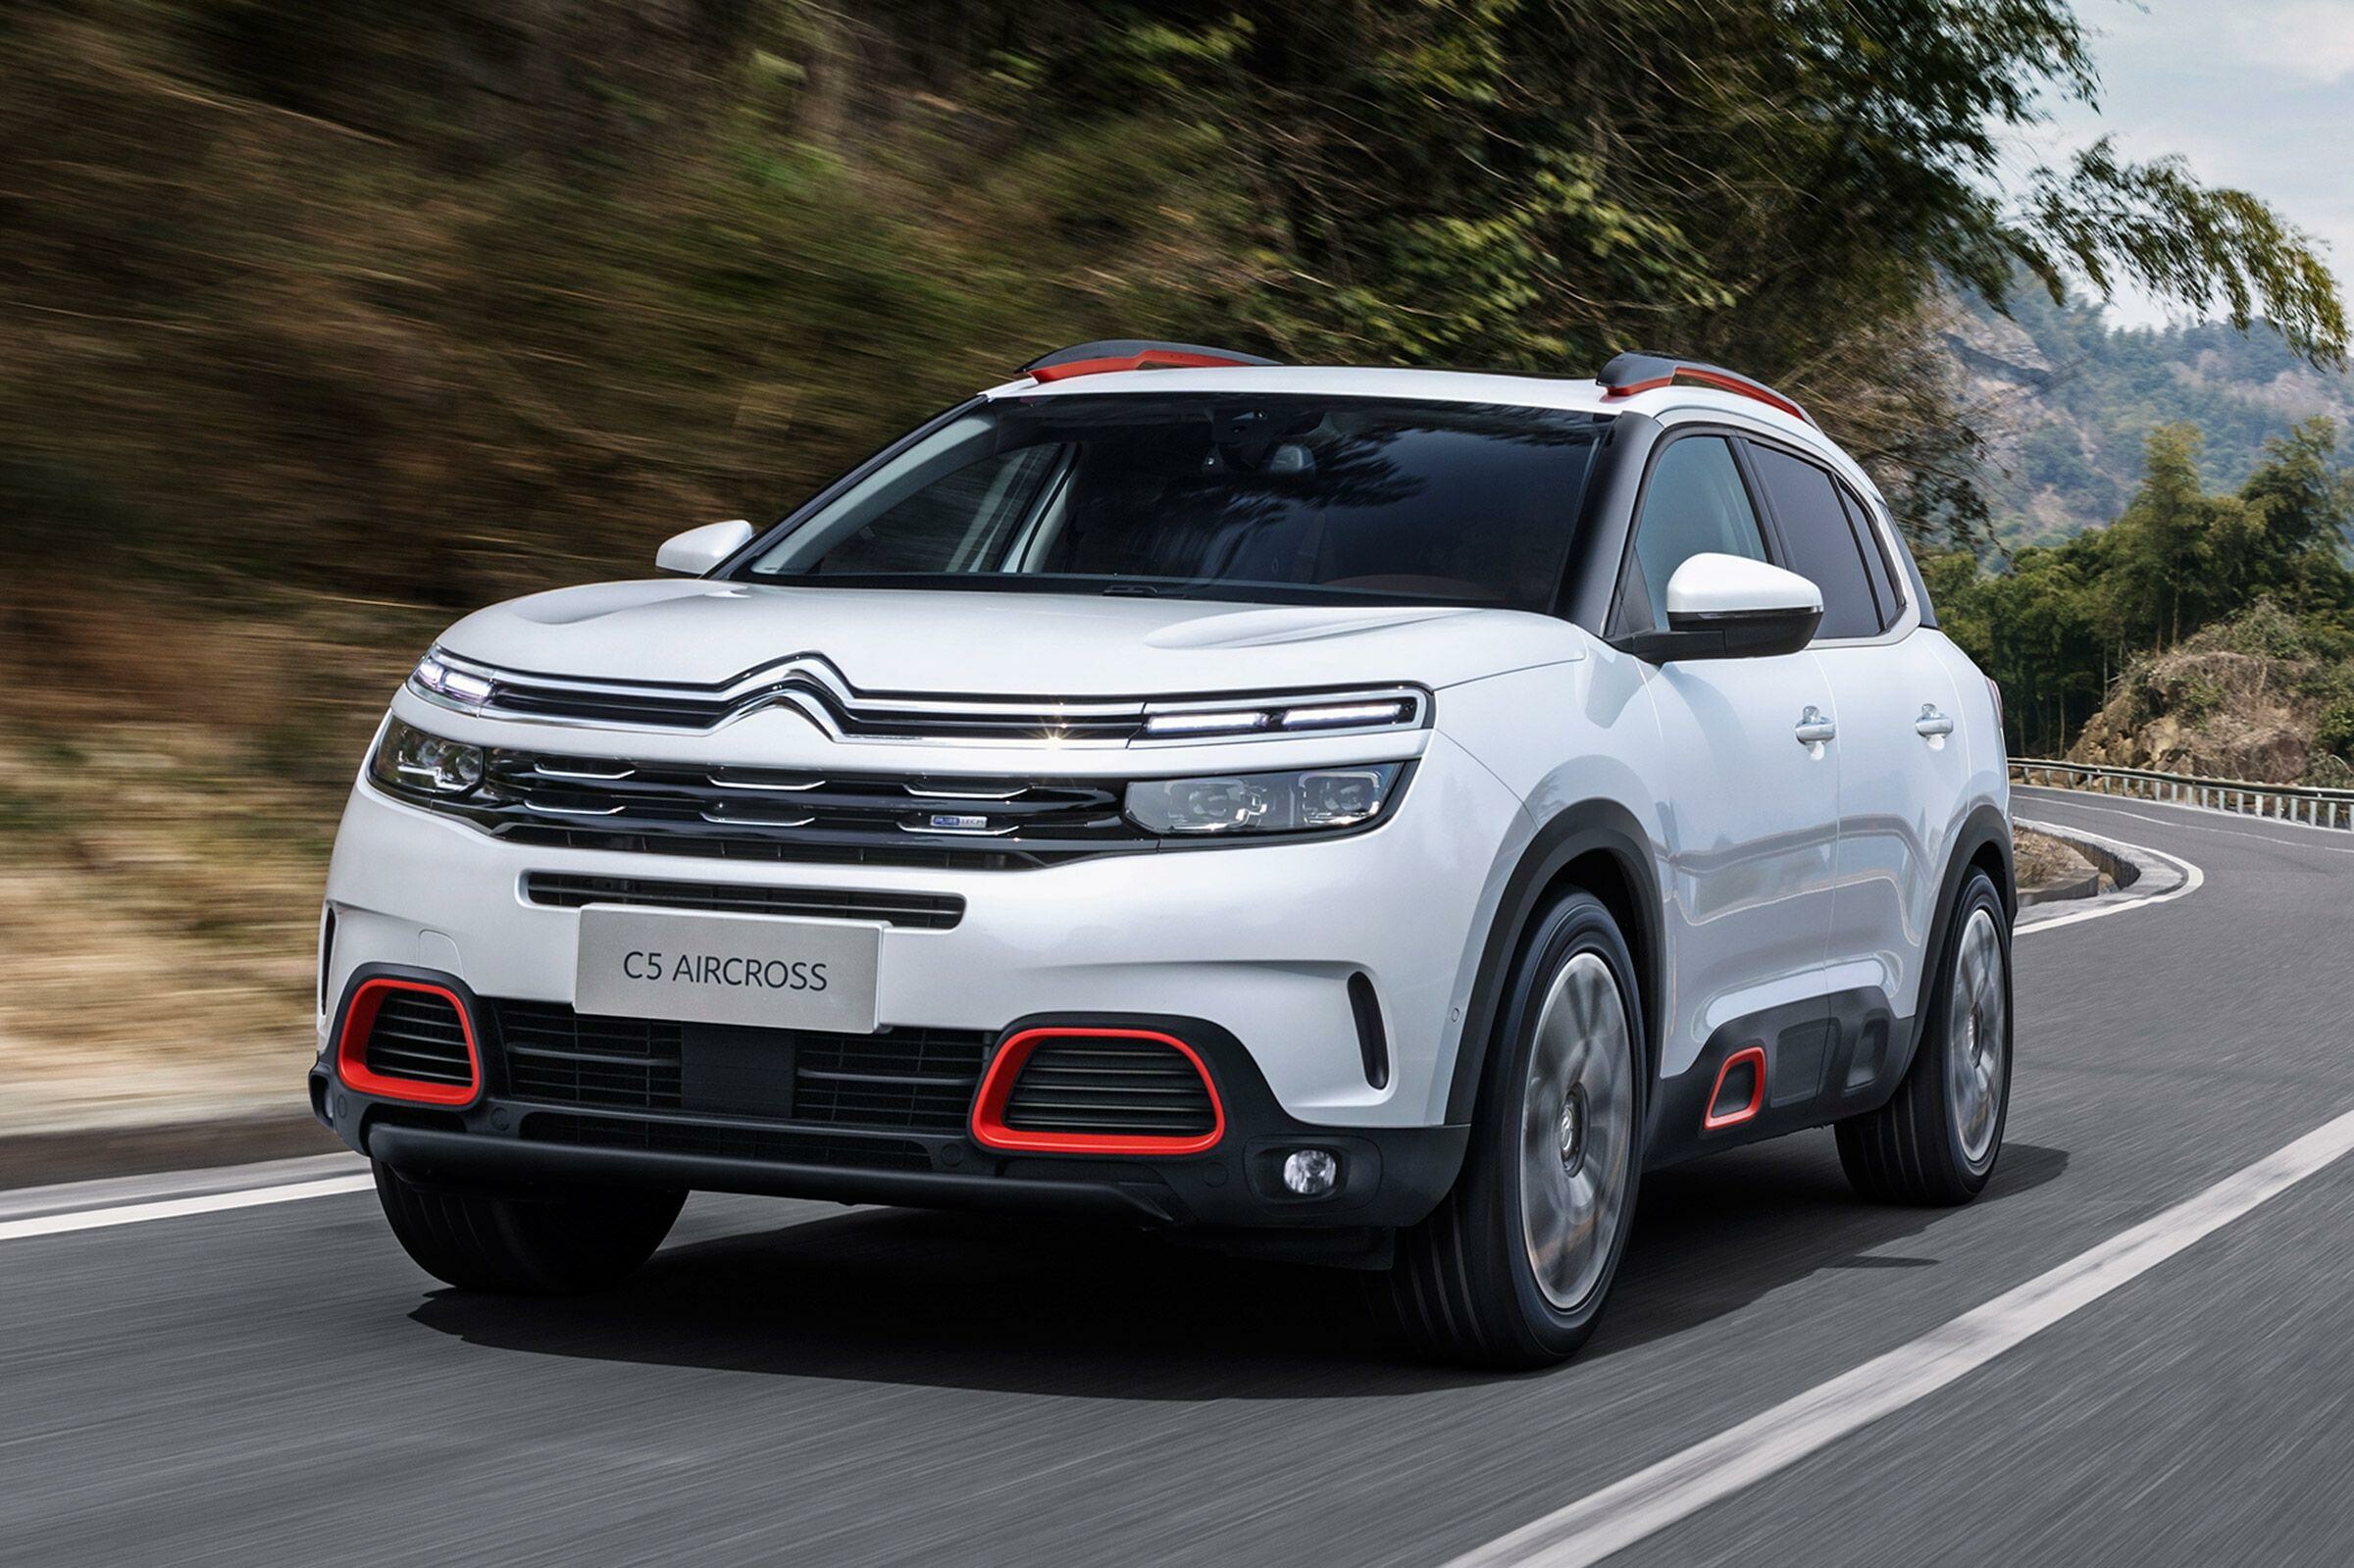 Citroen: The company entered the Indian market in early 2021 with the launch of the C5 Aircross SUV. 2400x1600 HD Background.